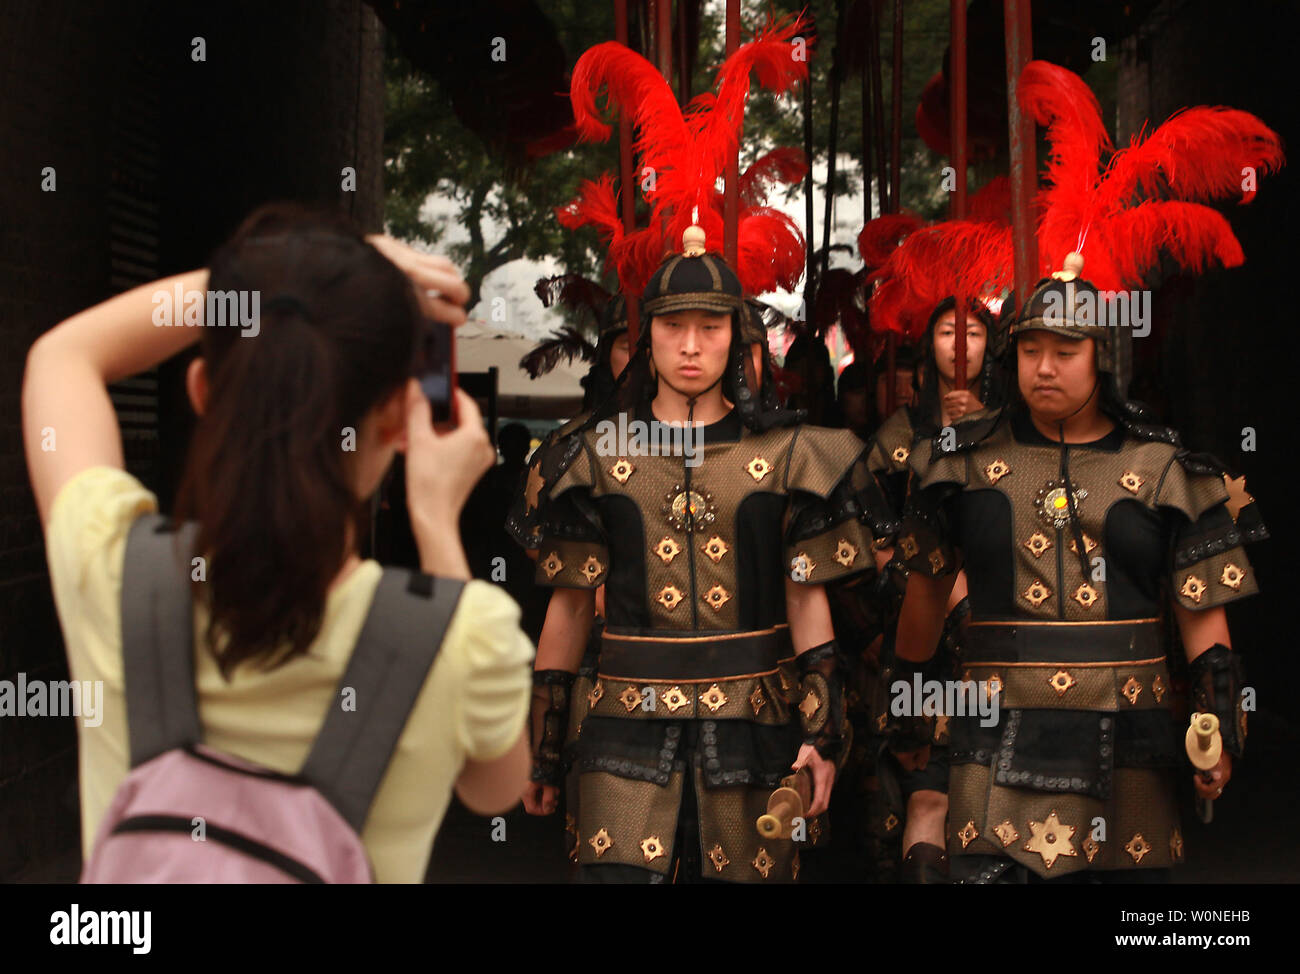 Chinese actors dressed in Tang Dynasty imperial military march to an outdoor stage inside the ancient Chinese walled city Xi'an, one of the oldest cities in China and the capital of Shaanxi Province on June 26, 2012.  Xi'an is one of the Four Great Ancient Capitals of China, having maintained the position under several of the most important Chinese dynasties. It is the most complete walled city that has survived in China.    UPI/Stephen Shaver Stock Photo